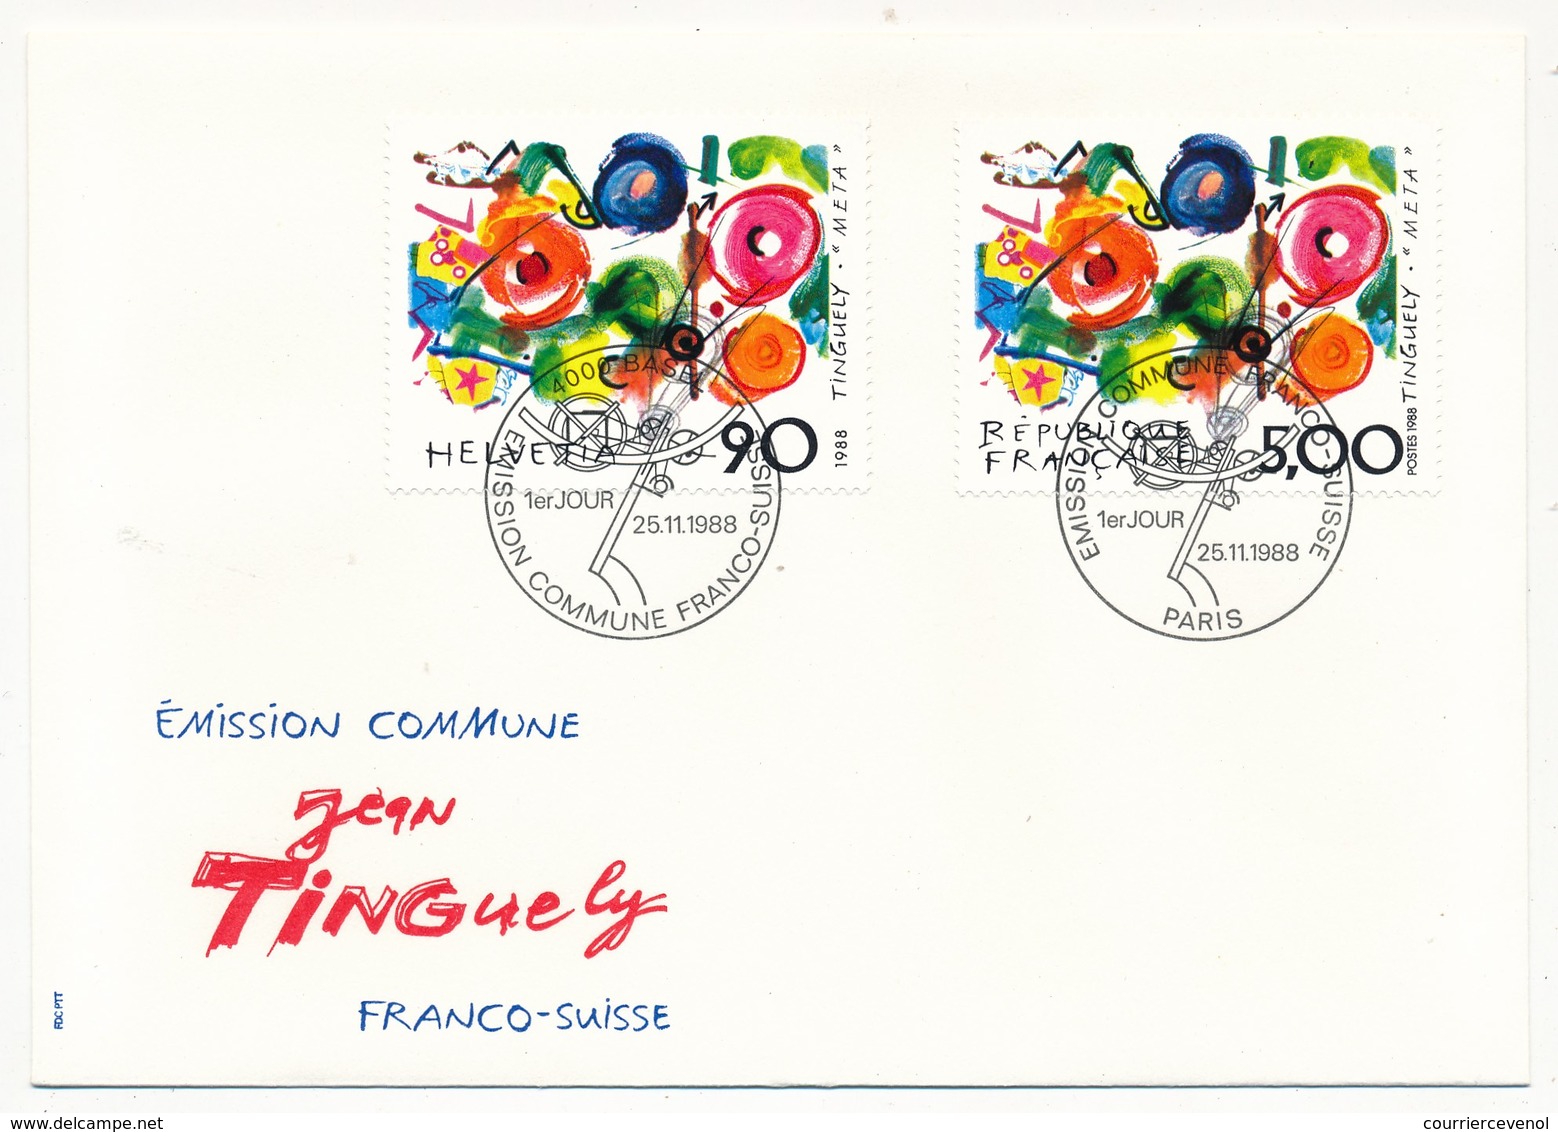 Enveloppe FDC Emission Commune France/Suisse - Jean Tinguely - 1988 - Joint Issues